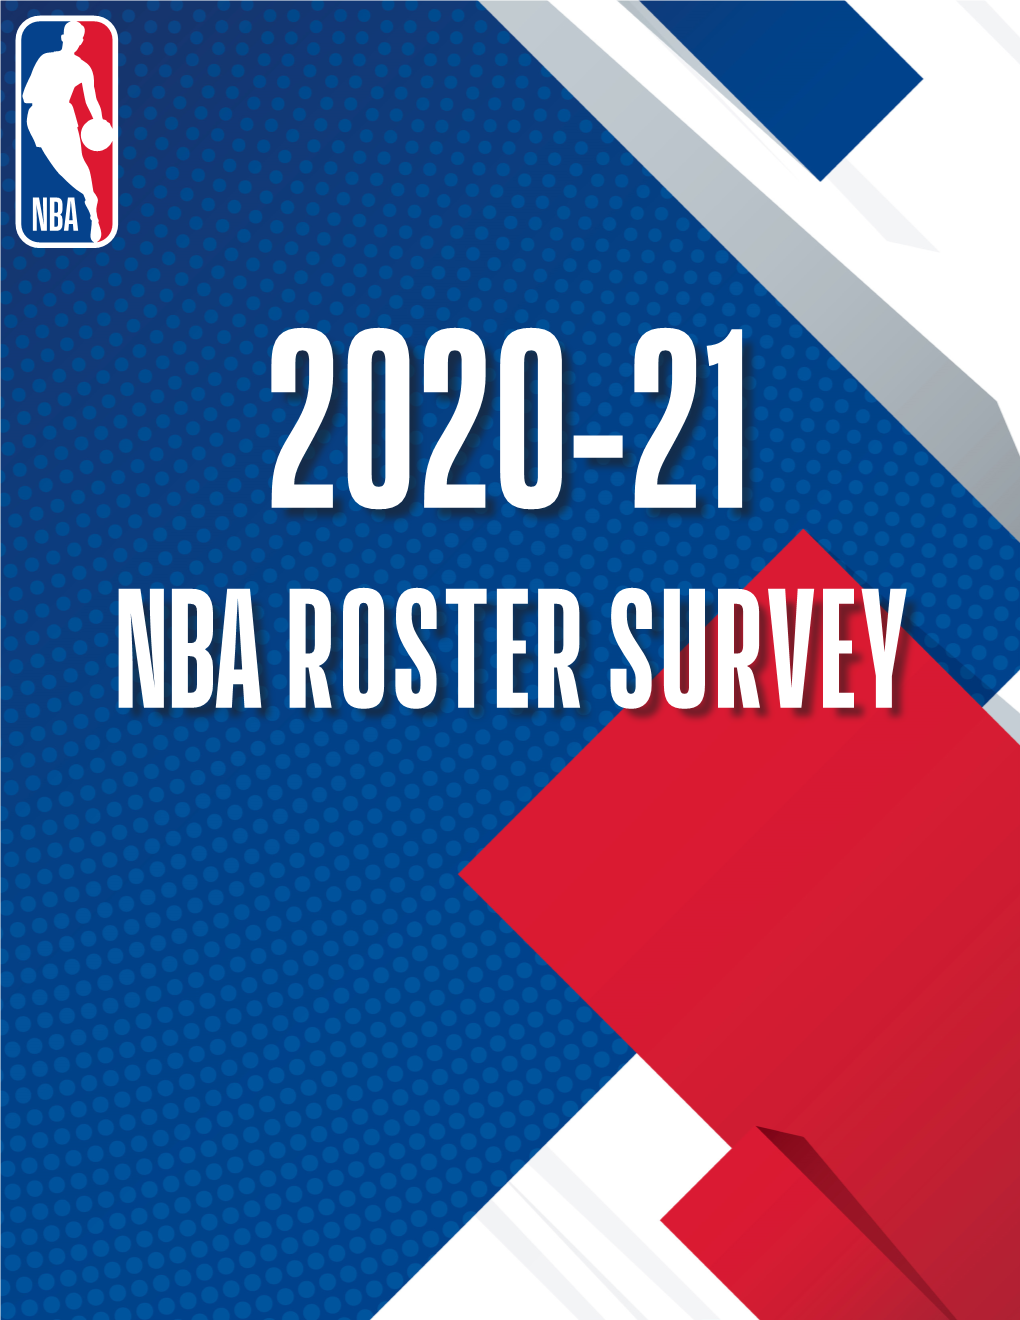 To View the Complete 2020-21 NBA Roster Survey